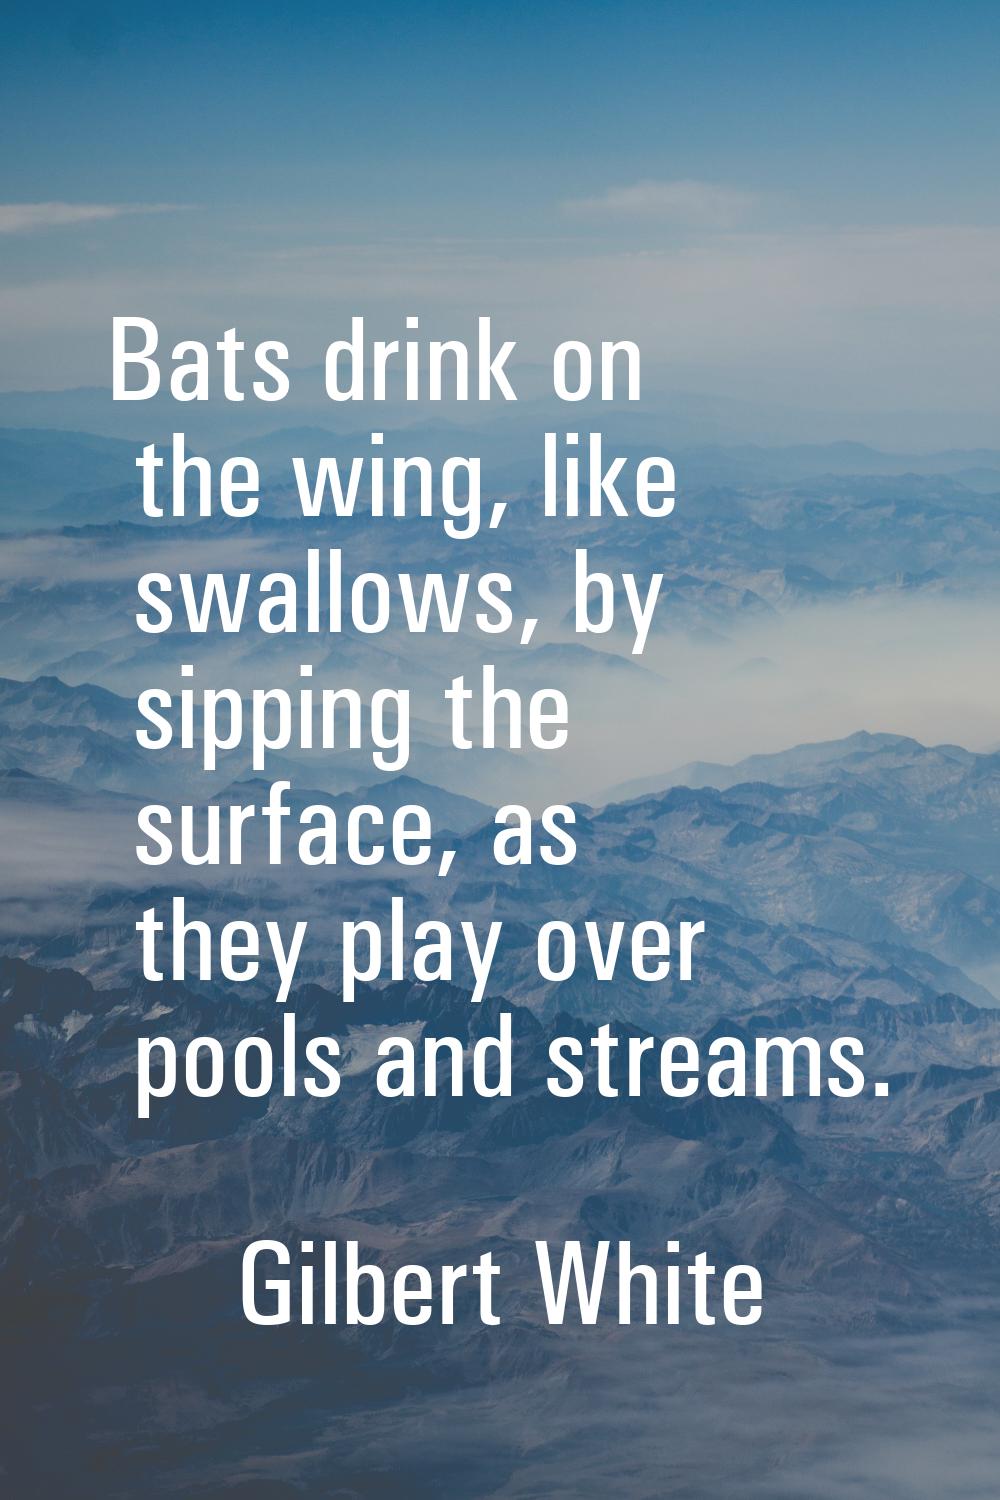 Bats drink on the wing, like swallows, by sipping the surface, as they play over pools and streams.